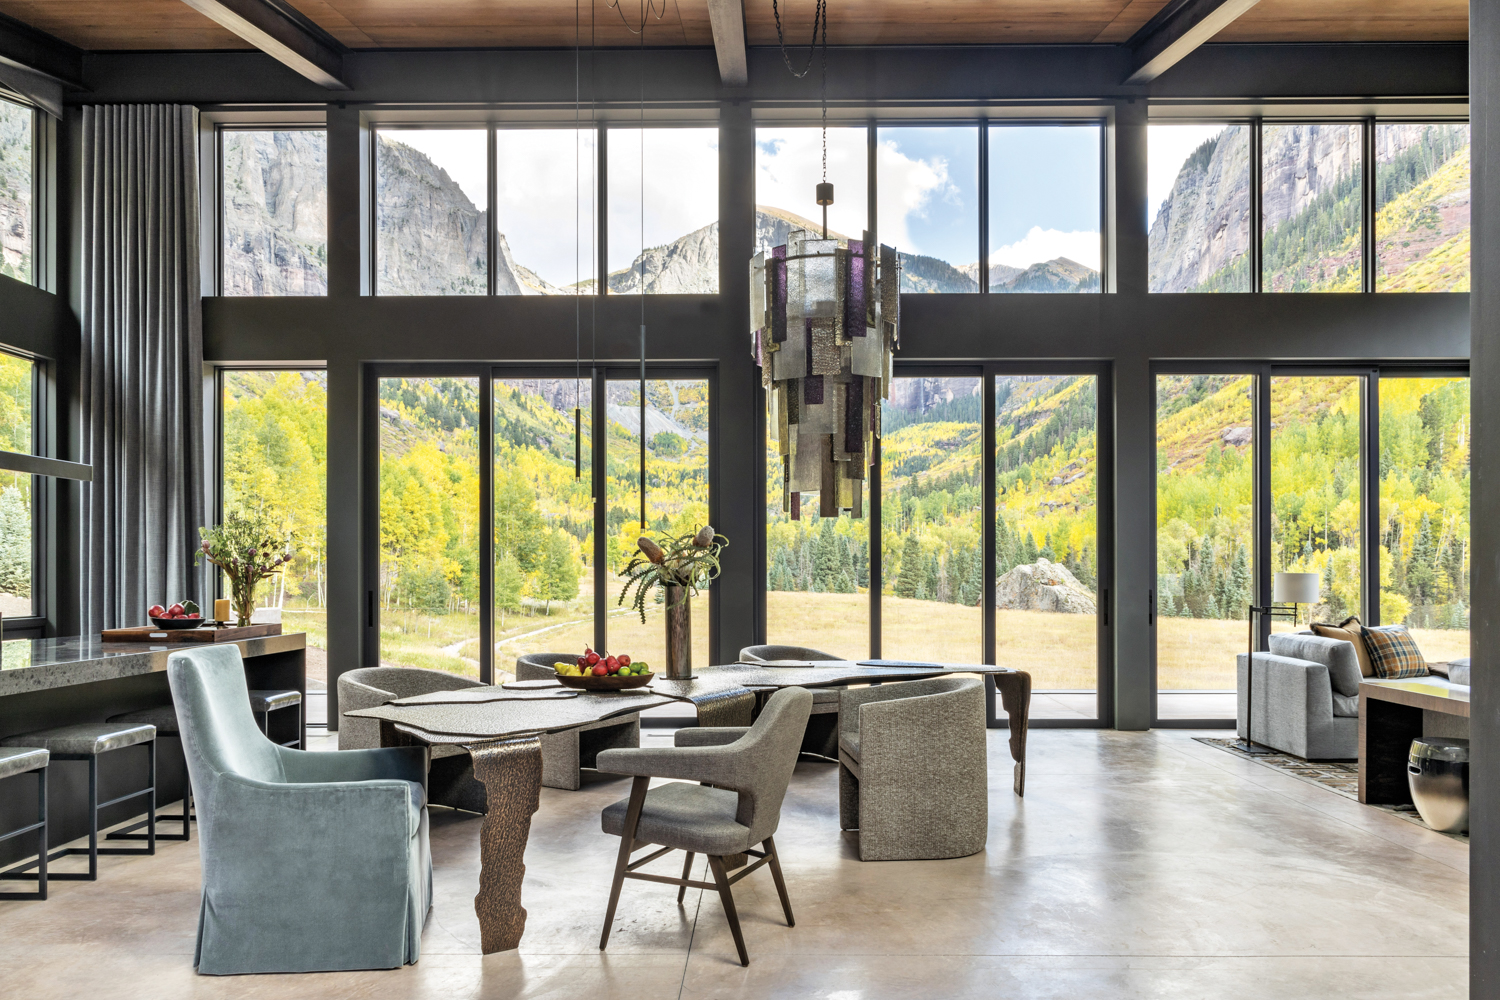 Loft-like dining area with two-story wall of windows, a sculptural chandelier and bronze dining table, varied chairs, and panoramic views outside